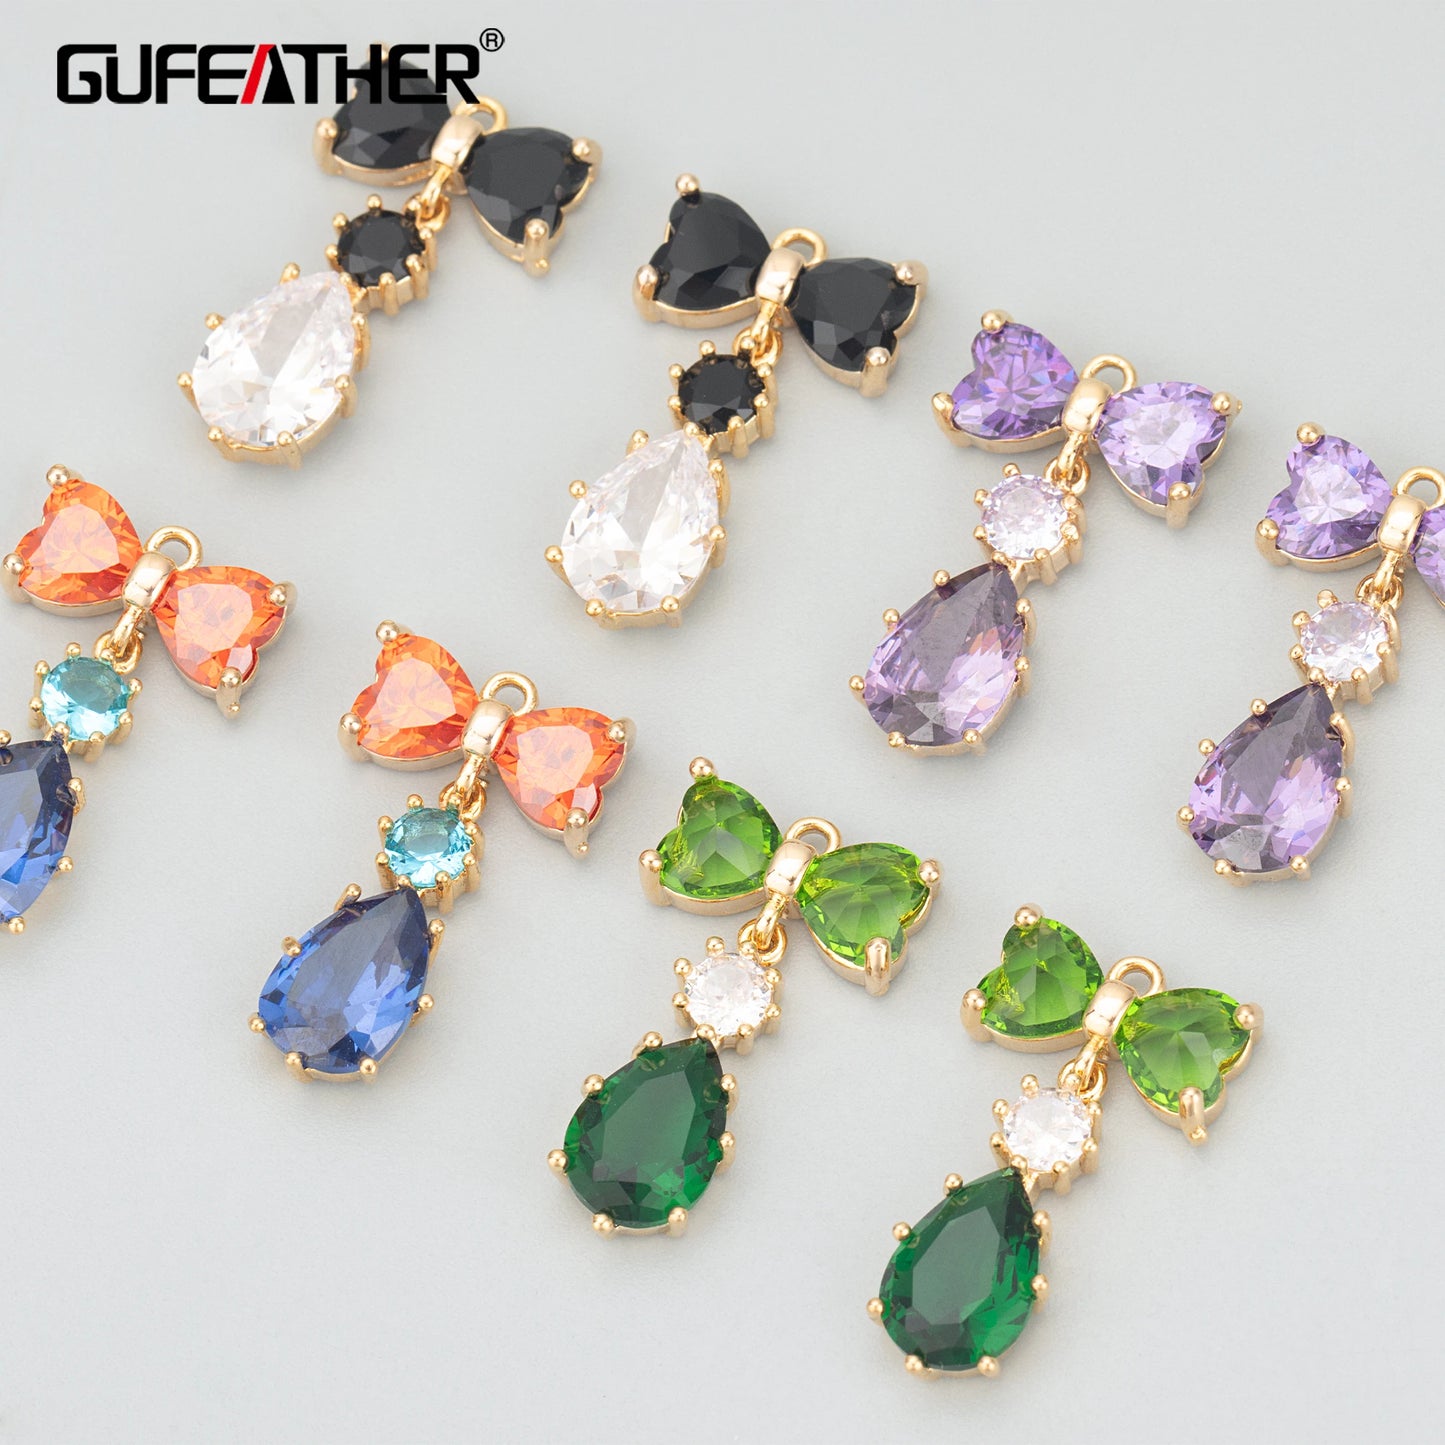 GUFEATHER MD86,jewelry accessories,18k gold plated,copper,zircons,glass,hand made,charms,jewelry making,diy pendants,4pcs/lot